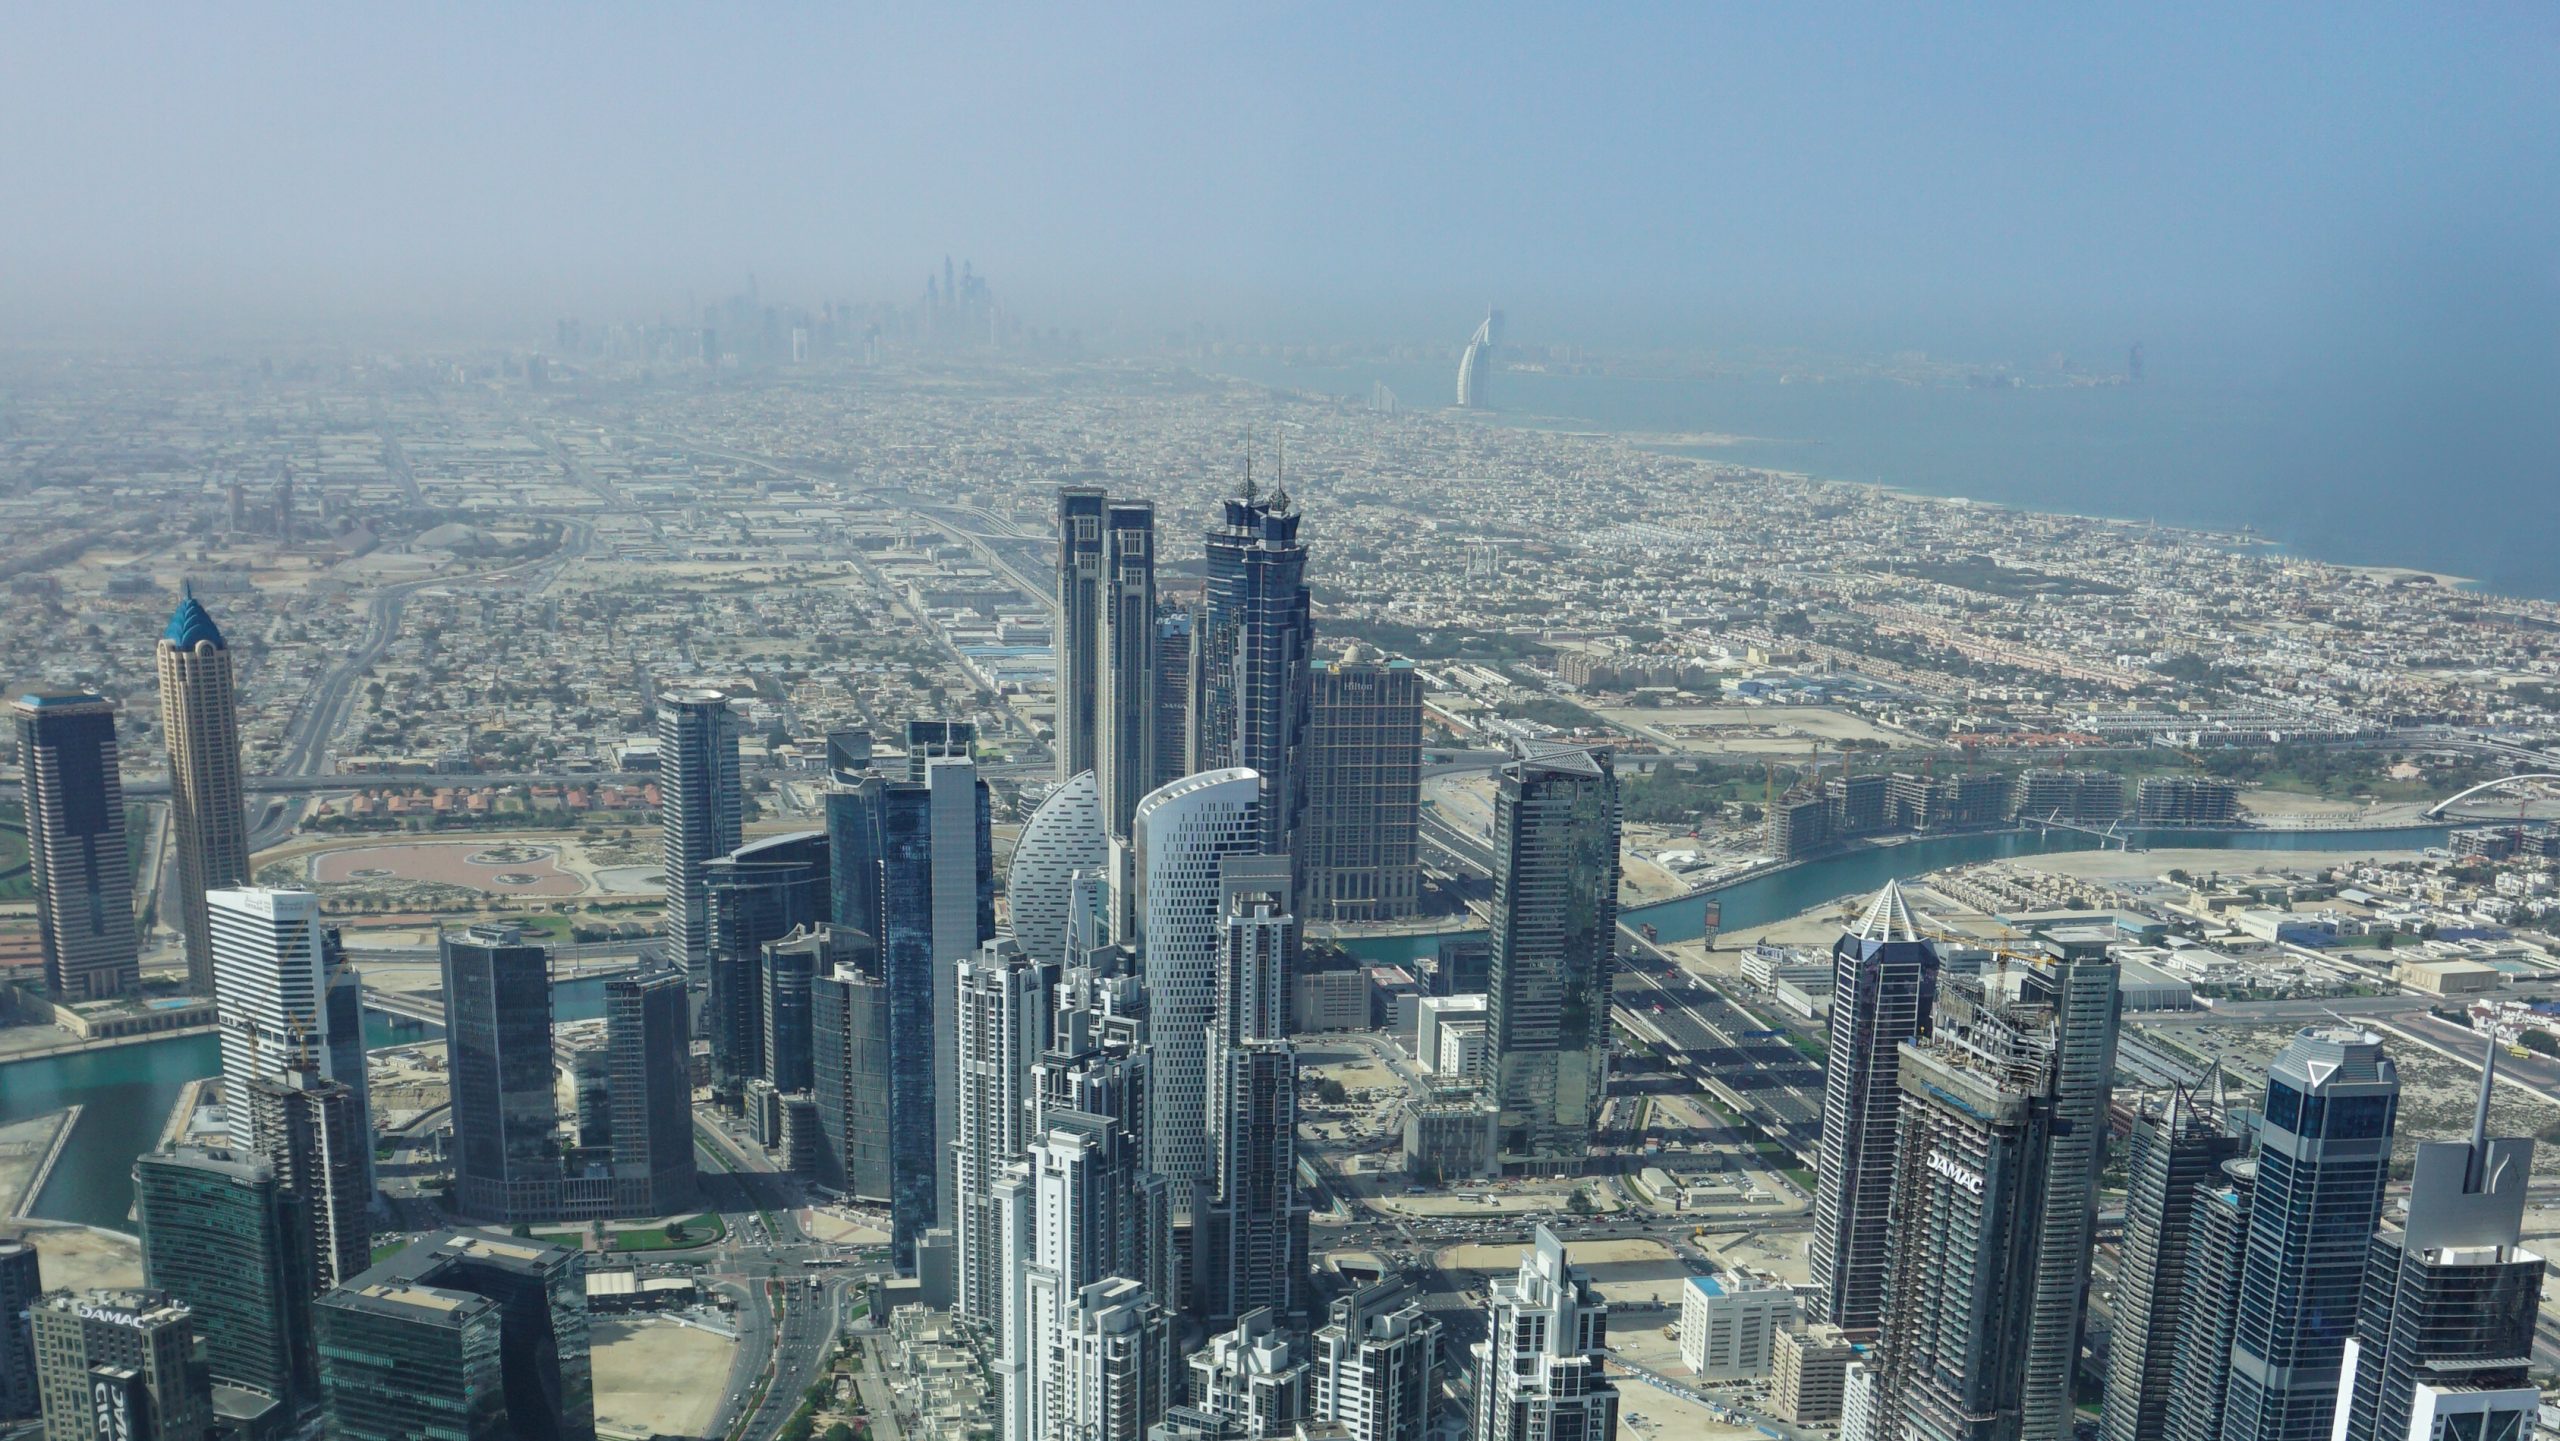 View of Burj Al Arab (in the distance) and other building from Burj Khalifa in Dubai Itinerary Day 2